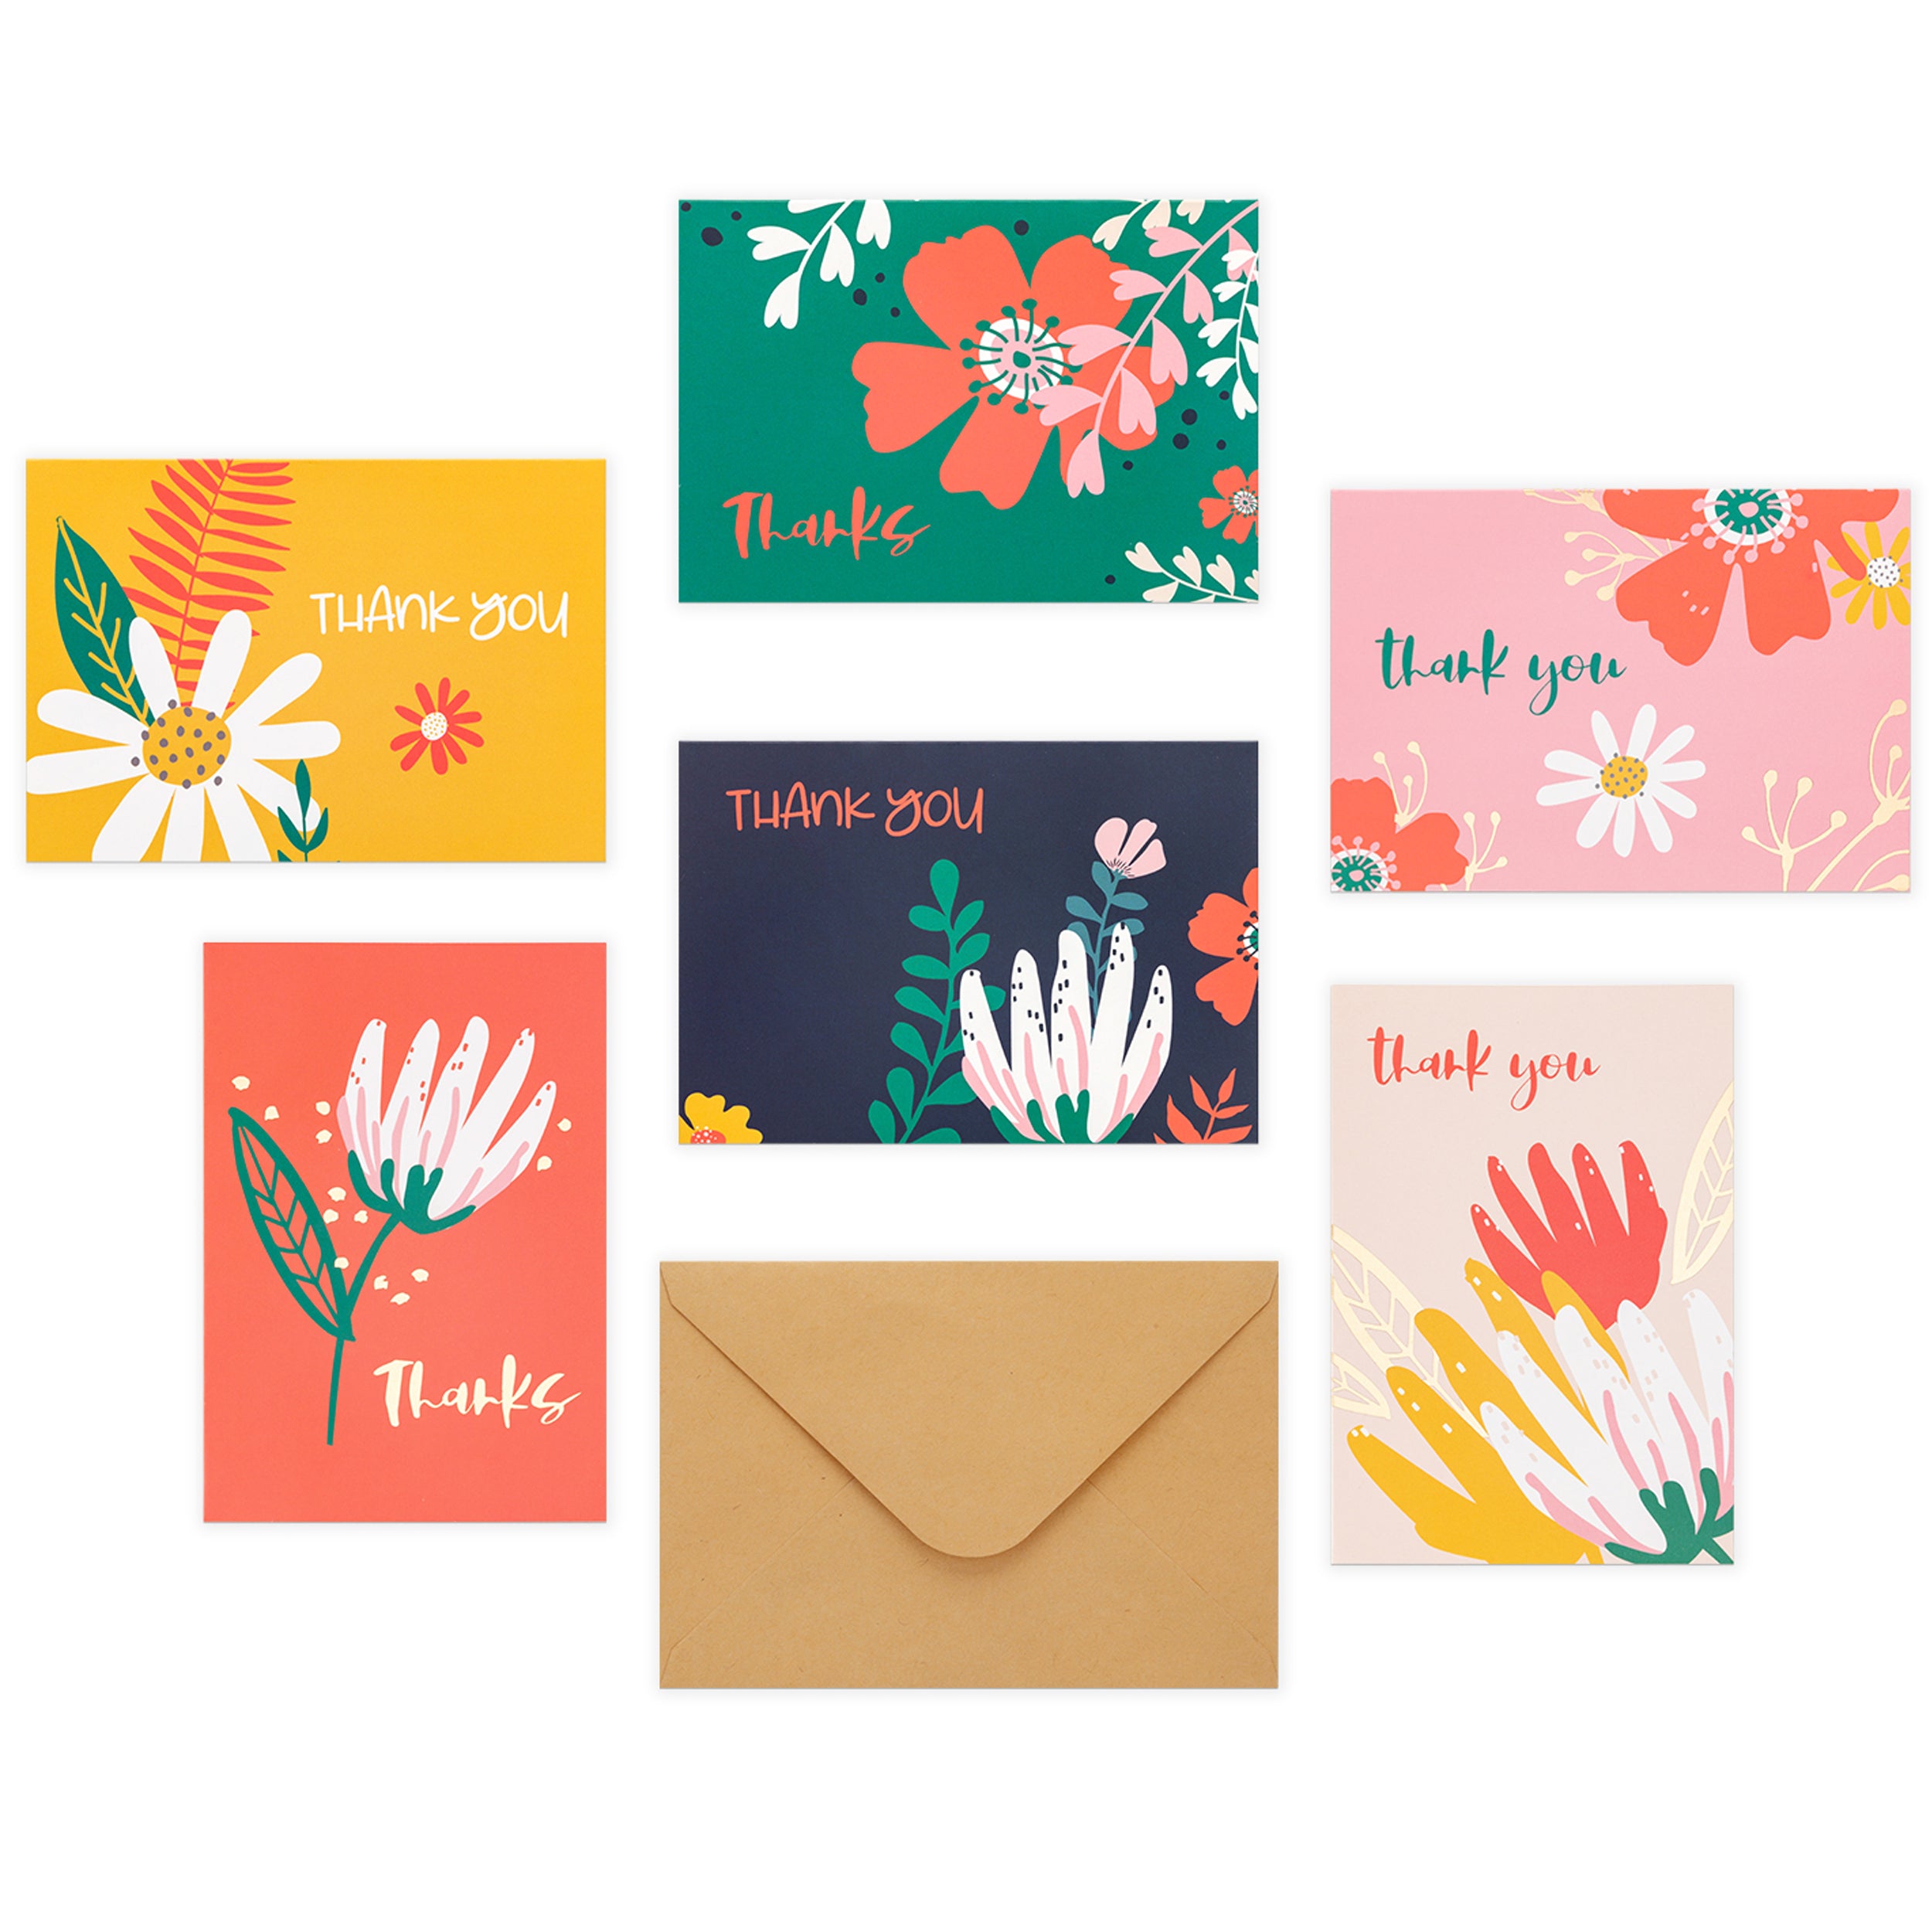 Outshine Blank Note Cards with Envelopes in Cute Storage Box - Set of 36  (Stripes & Dots), 3.5 x 5 Bulk Blank Cards with Envelopes All Occasion